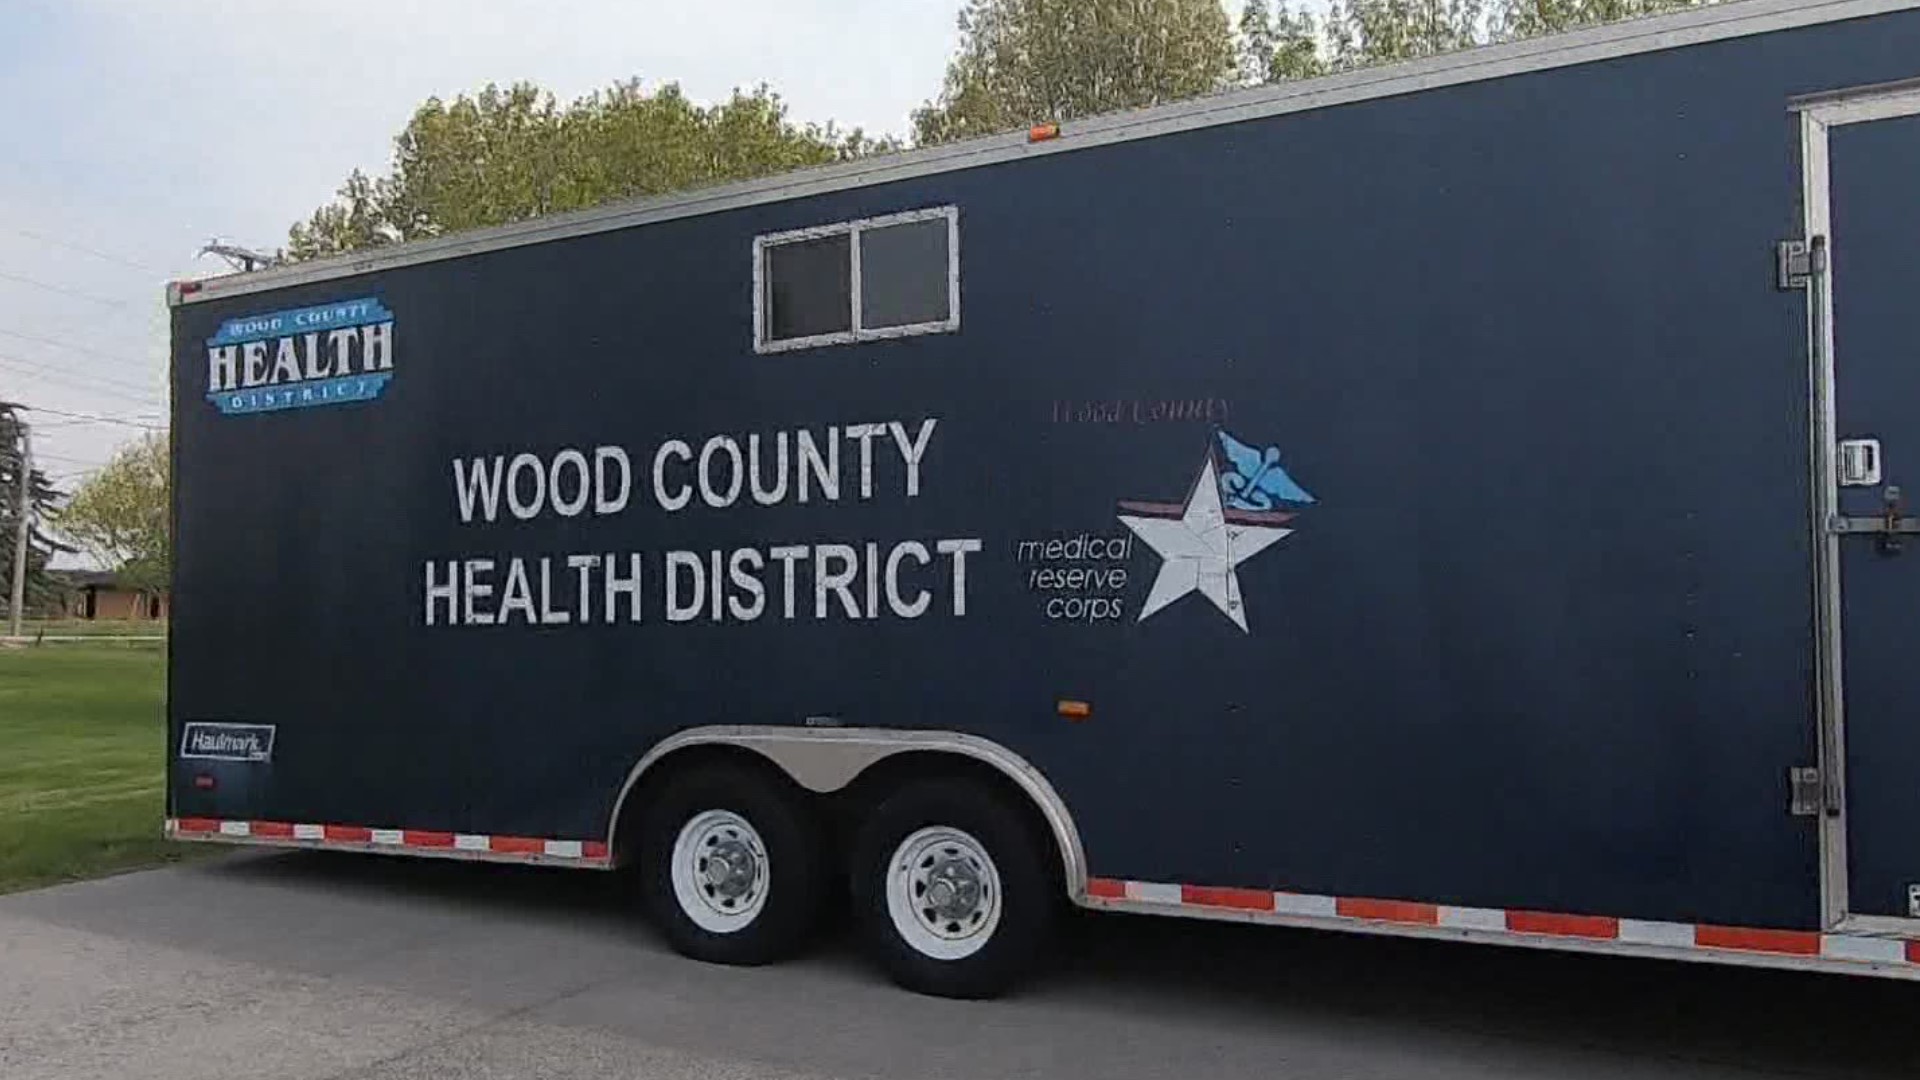 Nurses will meet you at any location in Wood County to give you your shot.